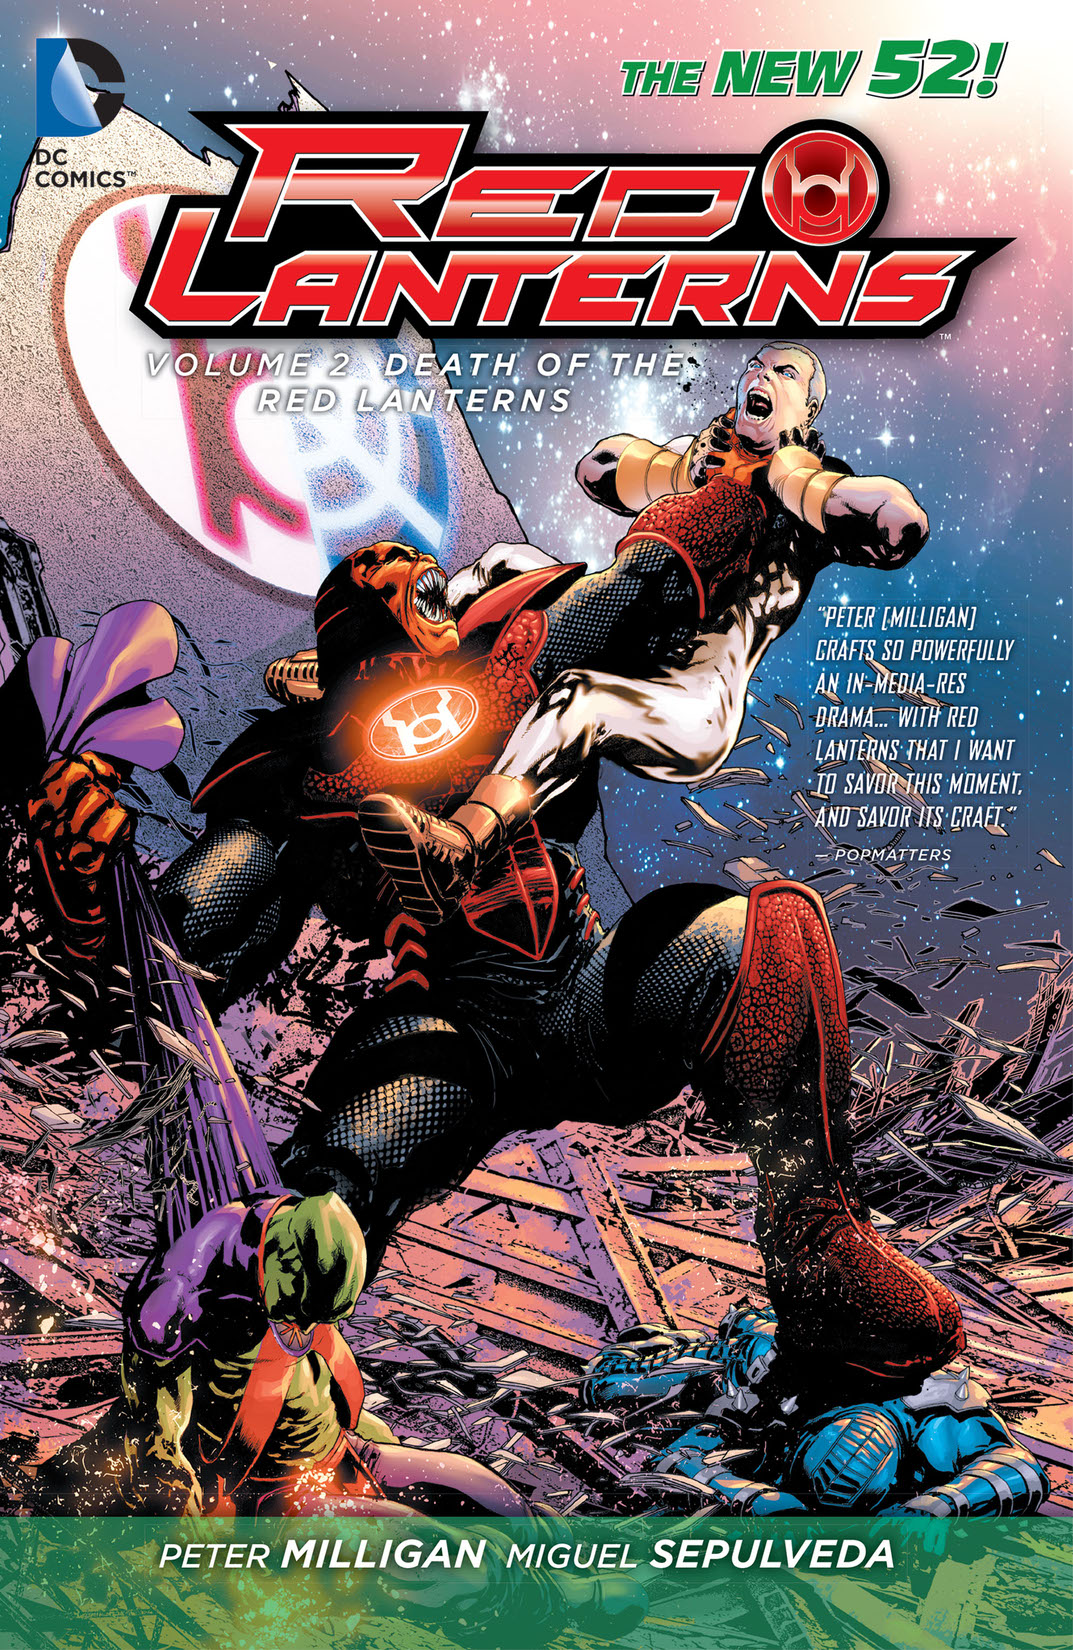 Red Lanterns Vol. 2: The Death of the Red Lanterns preview images